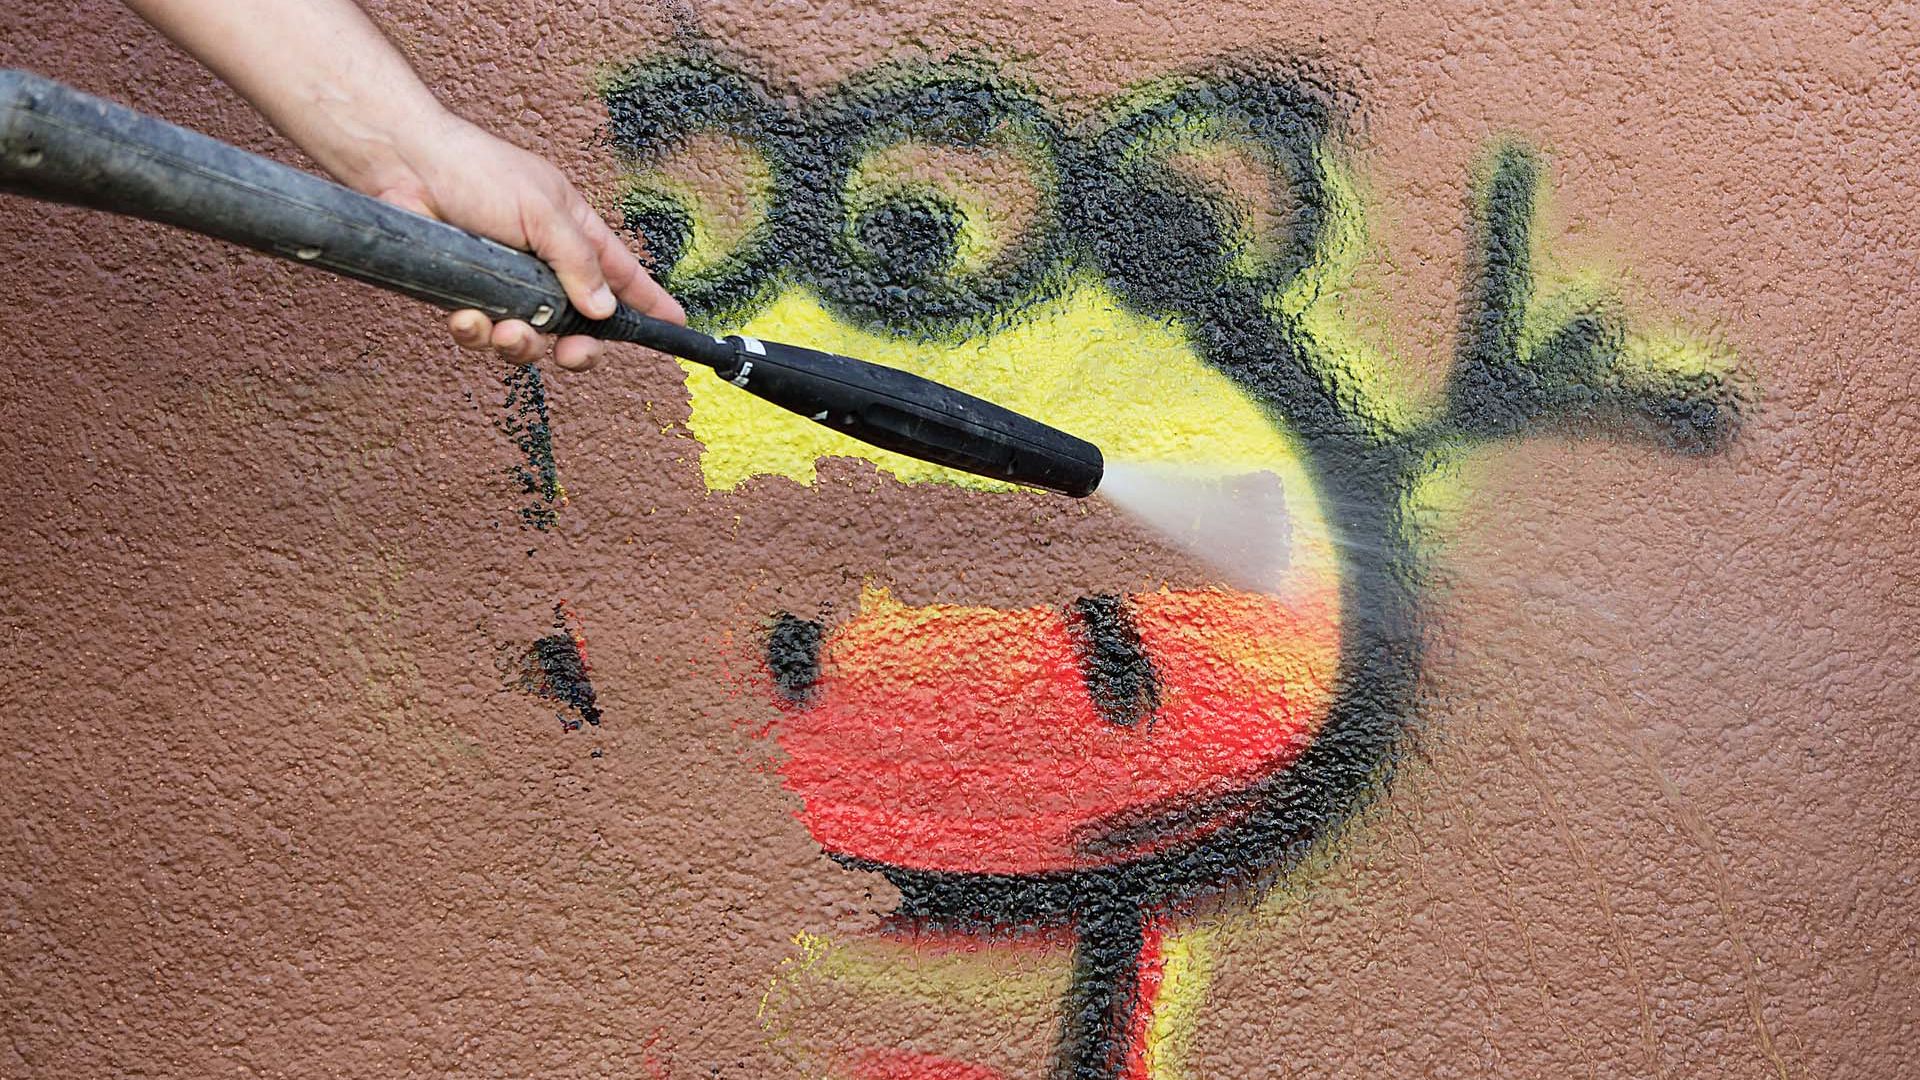 Permanent, clear coating to protect against vandalism graffiti and anti-fly posters